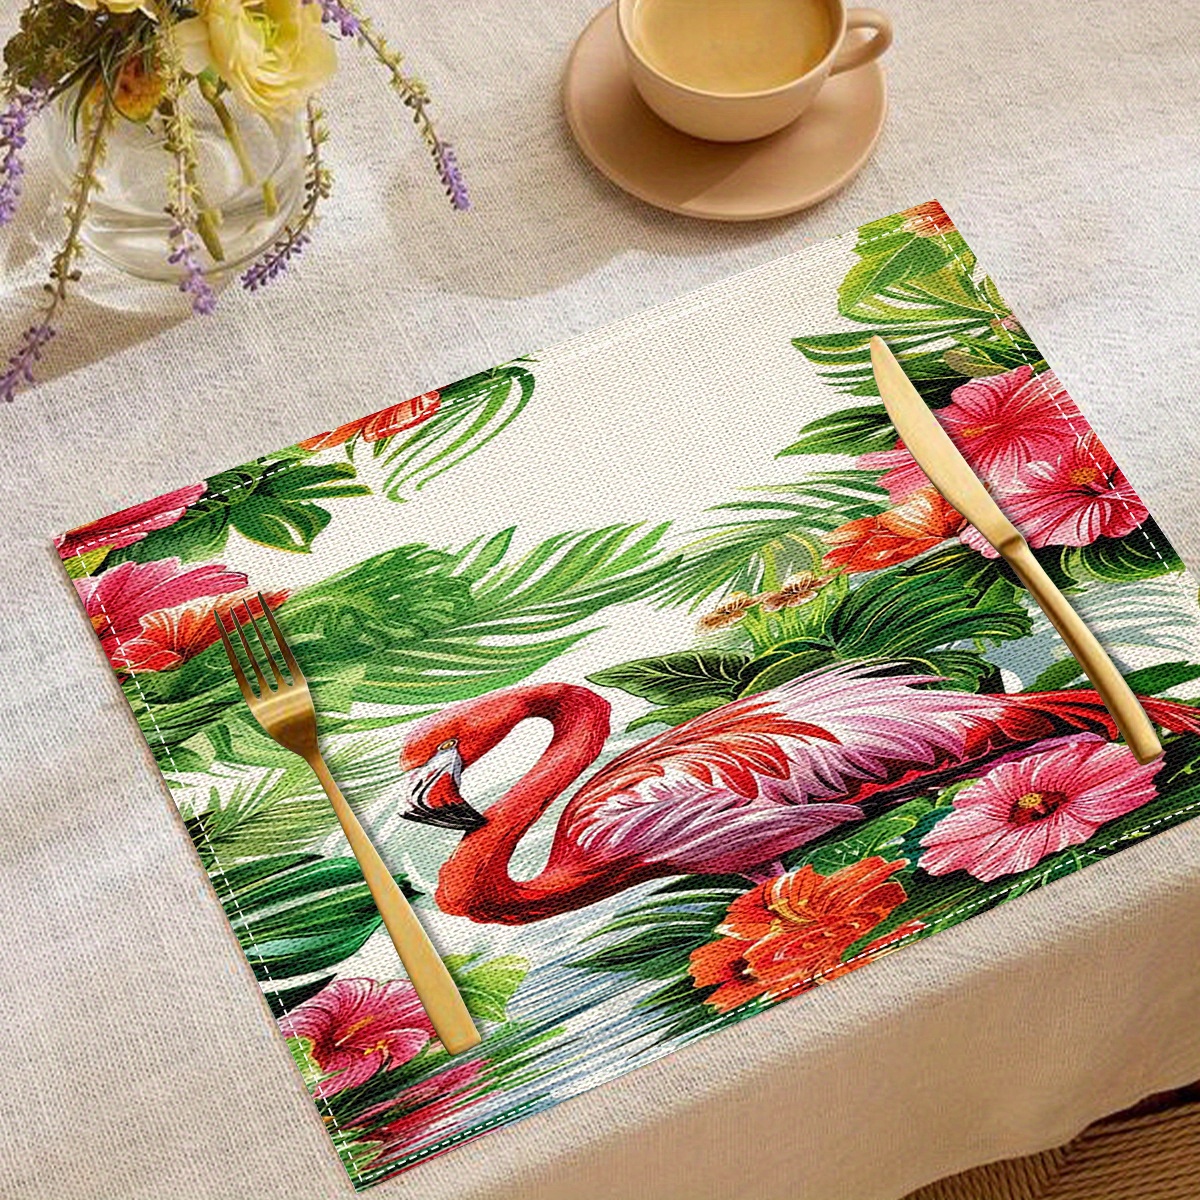 

4-piece Set Flamingo Print Placemats - Tropical Floral Design, 100% Woven Linen, Square, Heat Resistant, Machine Washable Table Mats For Dining And Kitchen